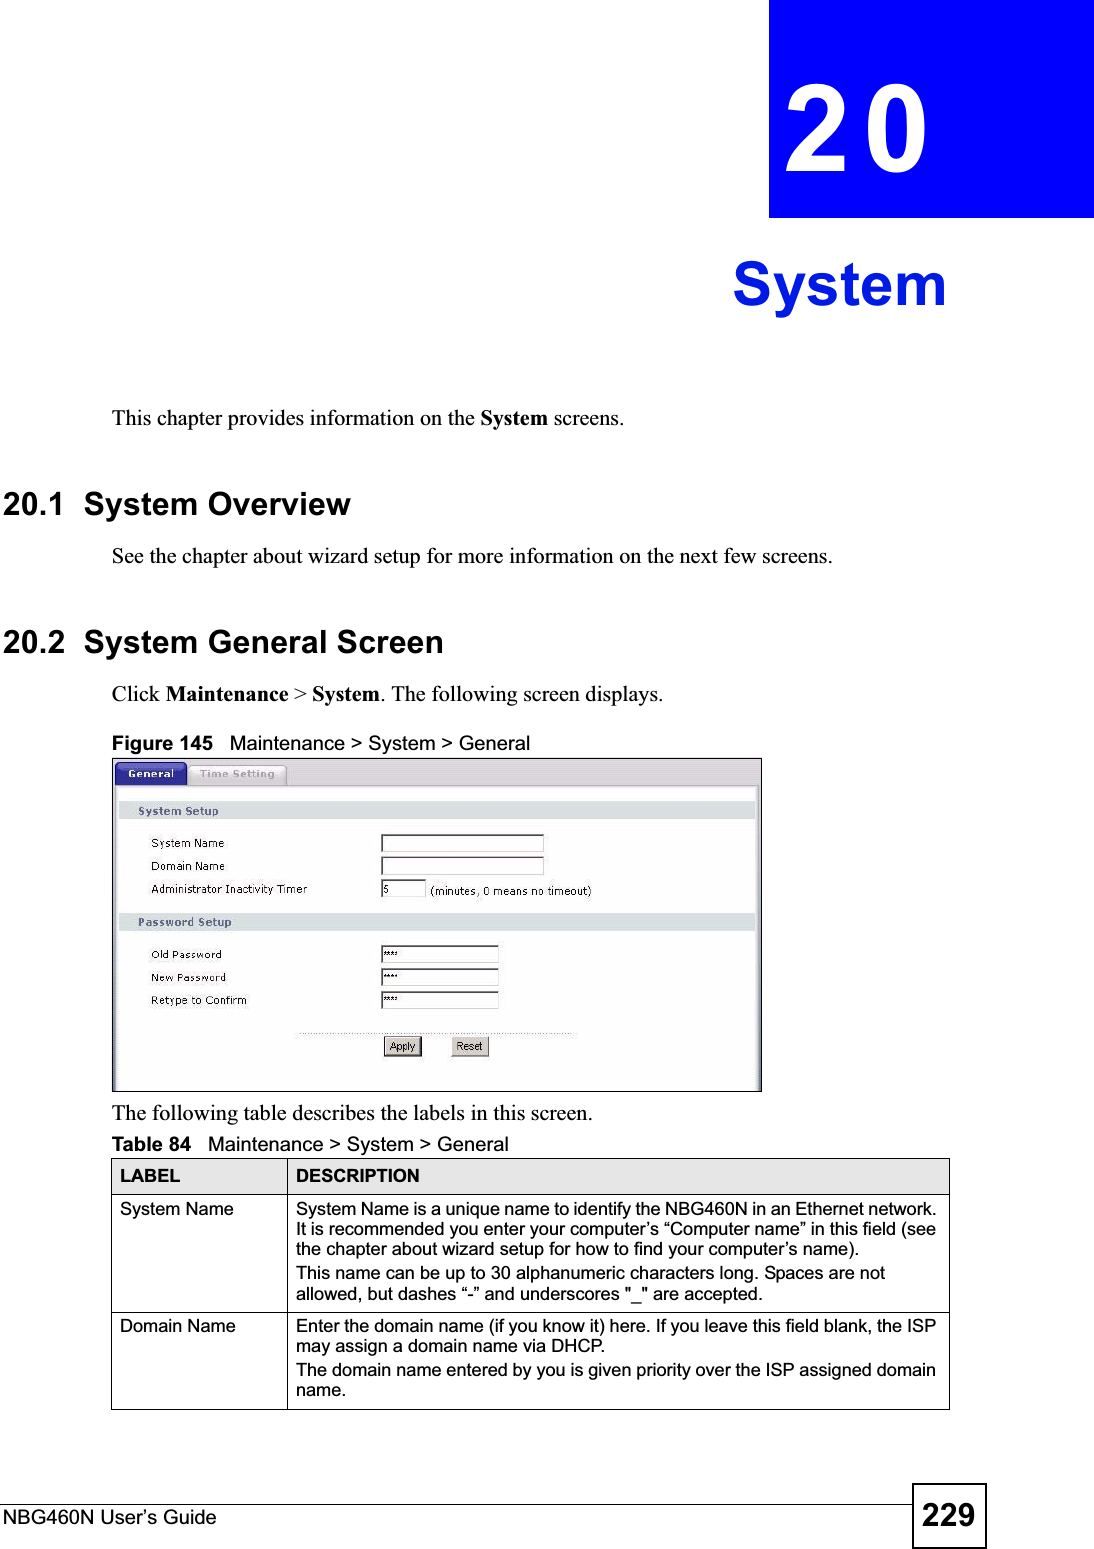 NBG460N User’s Guide 229CHAPTER 20SystemThis chapter provides information on the System screens. 20.1  System OverviewSee the chapter about wizard setup for more information on the next few screens.20.2  System General Screen Click Maintenance &gt; System. The following screen displays.Figure 145   Maintenance &gt; System &gt; General The following table describes the labels in this screen.Table 84   Maintenance &gt; System &gt; GeneralLABEL DESCRIPTIONSystem Name System Name is a unique name to identify the NBG460N in an Ethernet network. It is recommended you enter your computer’s “Computer name” in this field (seethe chapter about wizard setup for how to find your computer’s name). This name can be up to 30 alphanumeric characters long. Spaces are not allowed, but dashes “-” and underscores &quot;_&quot; are accepted.Domain Name Enter the domain name (if you know it) here. If you leave this field blank, the ISP may assign a domain name via DHCP. The domain name entered by you is given priority over the ISP assigned domain name.